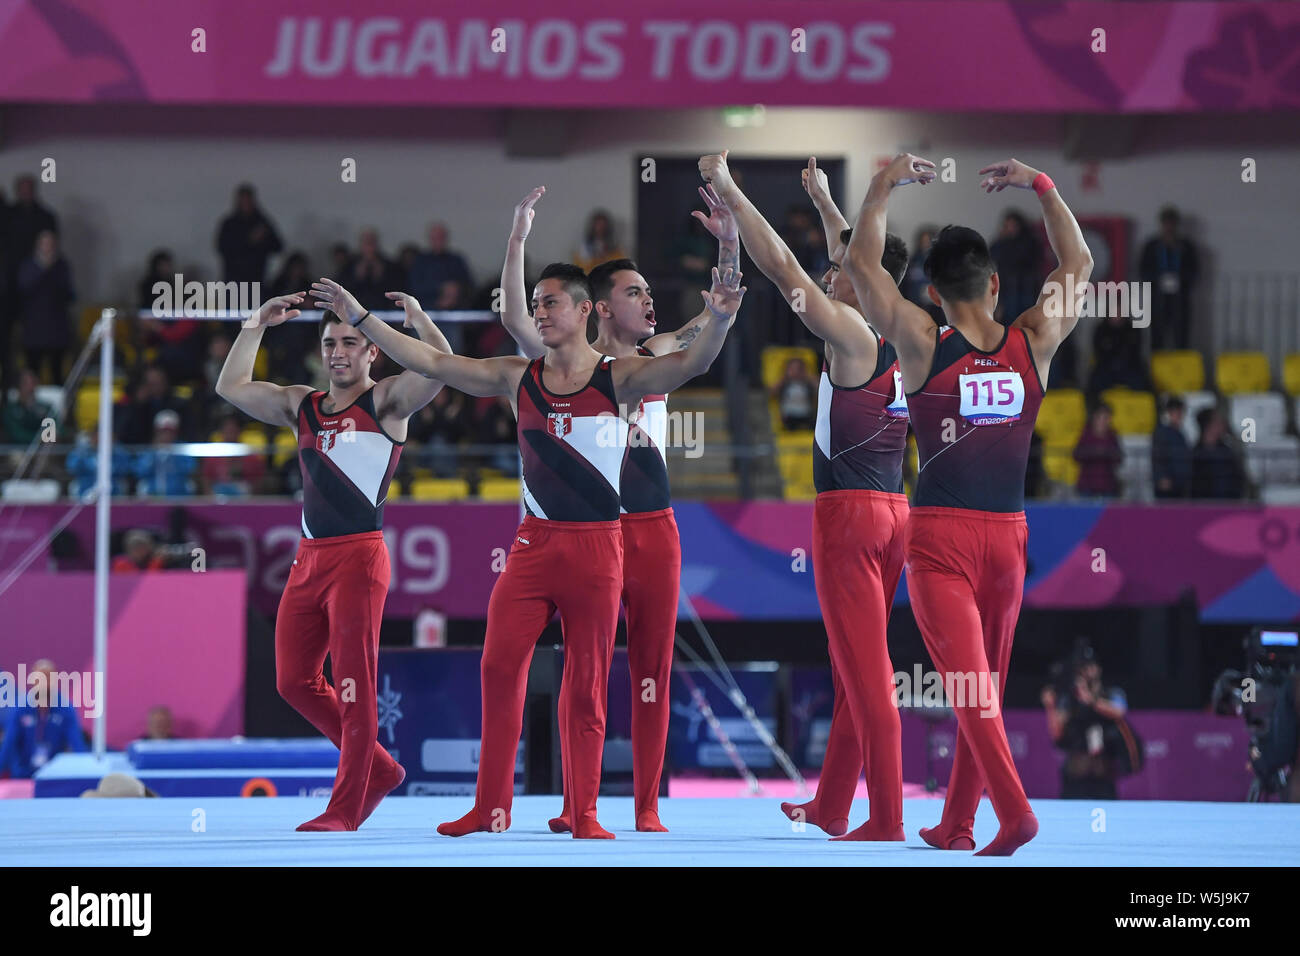 July 28, 2019, Lima, Peru: The team from Peru celebrates with the fans during the team finals competition held in the Polideportivo Villa El Salvador in Lima, Peru. Credit: Amy Sanderson/ZUMA Wire/Alamy Live News Stock Photo